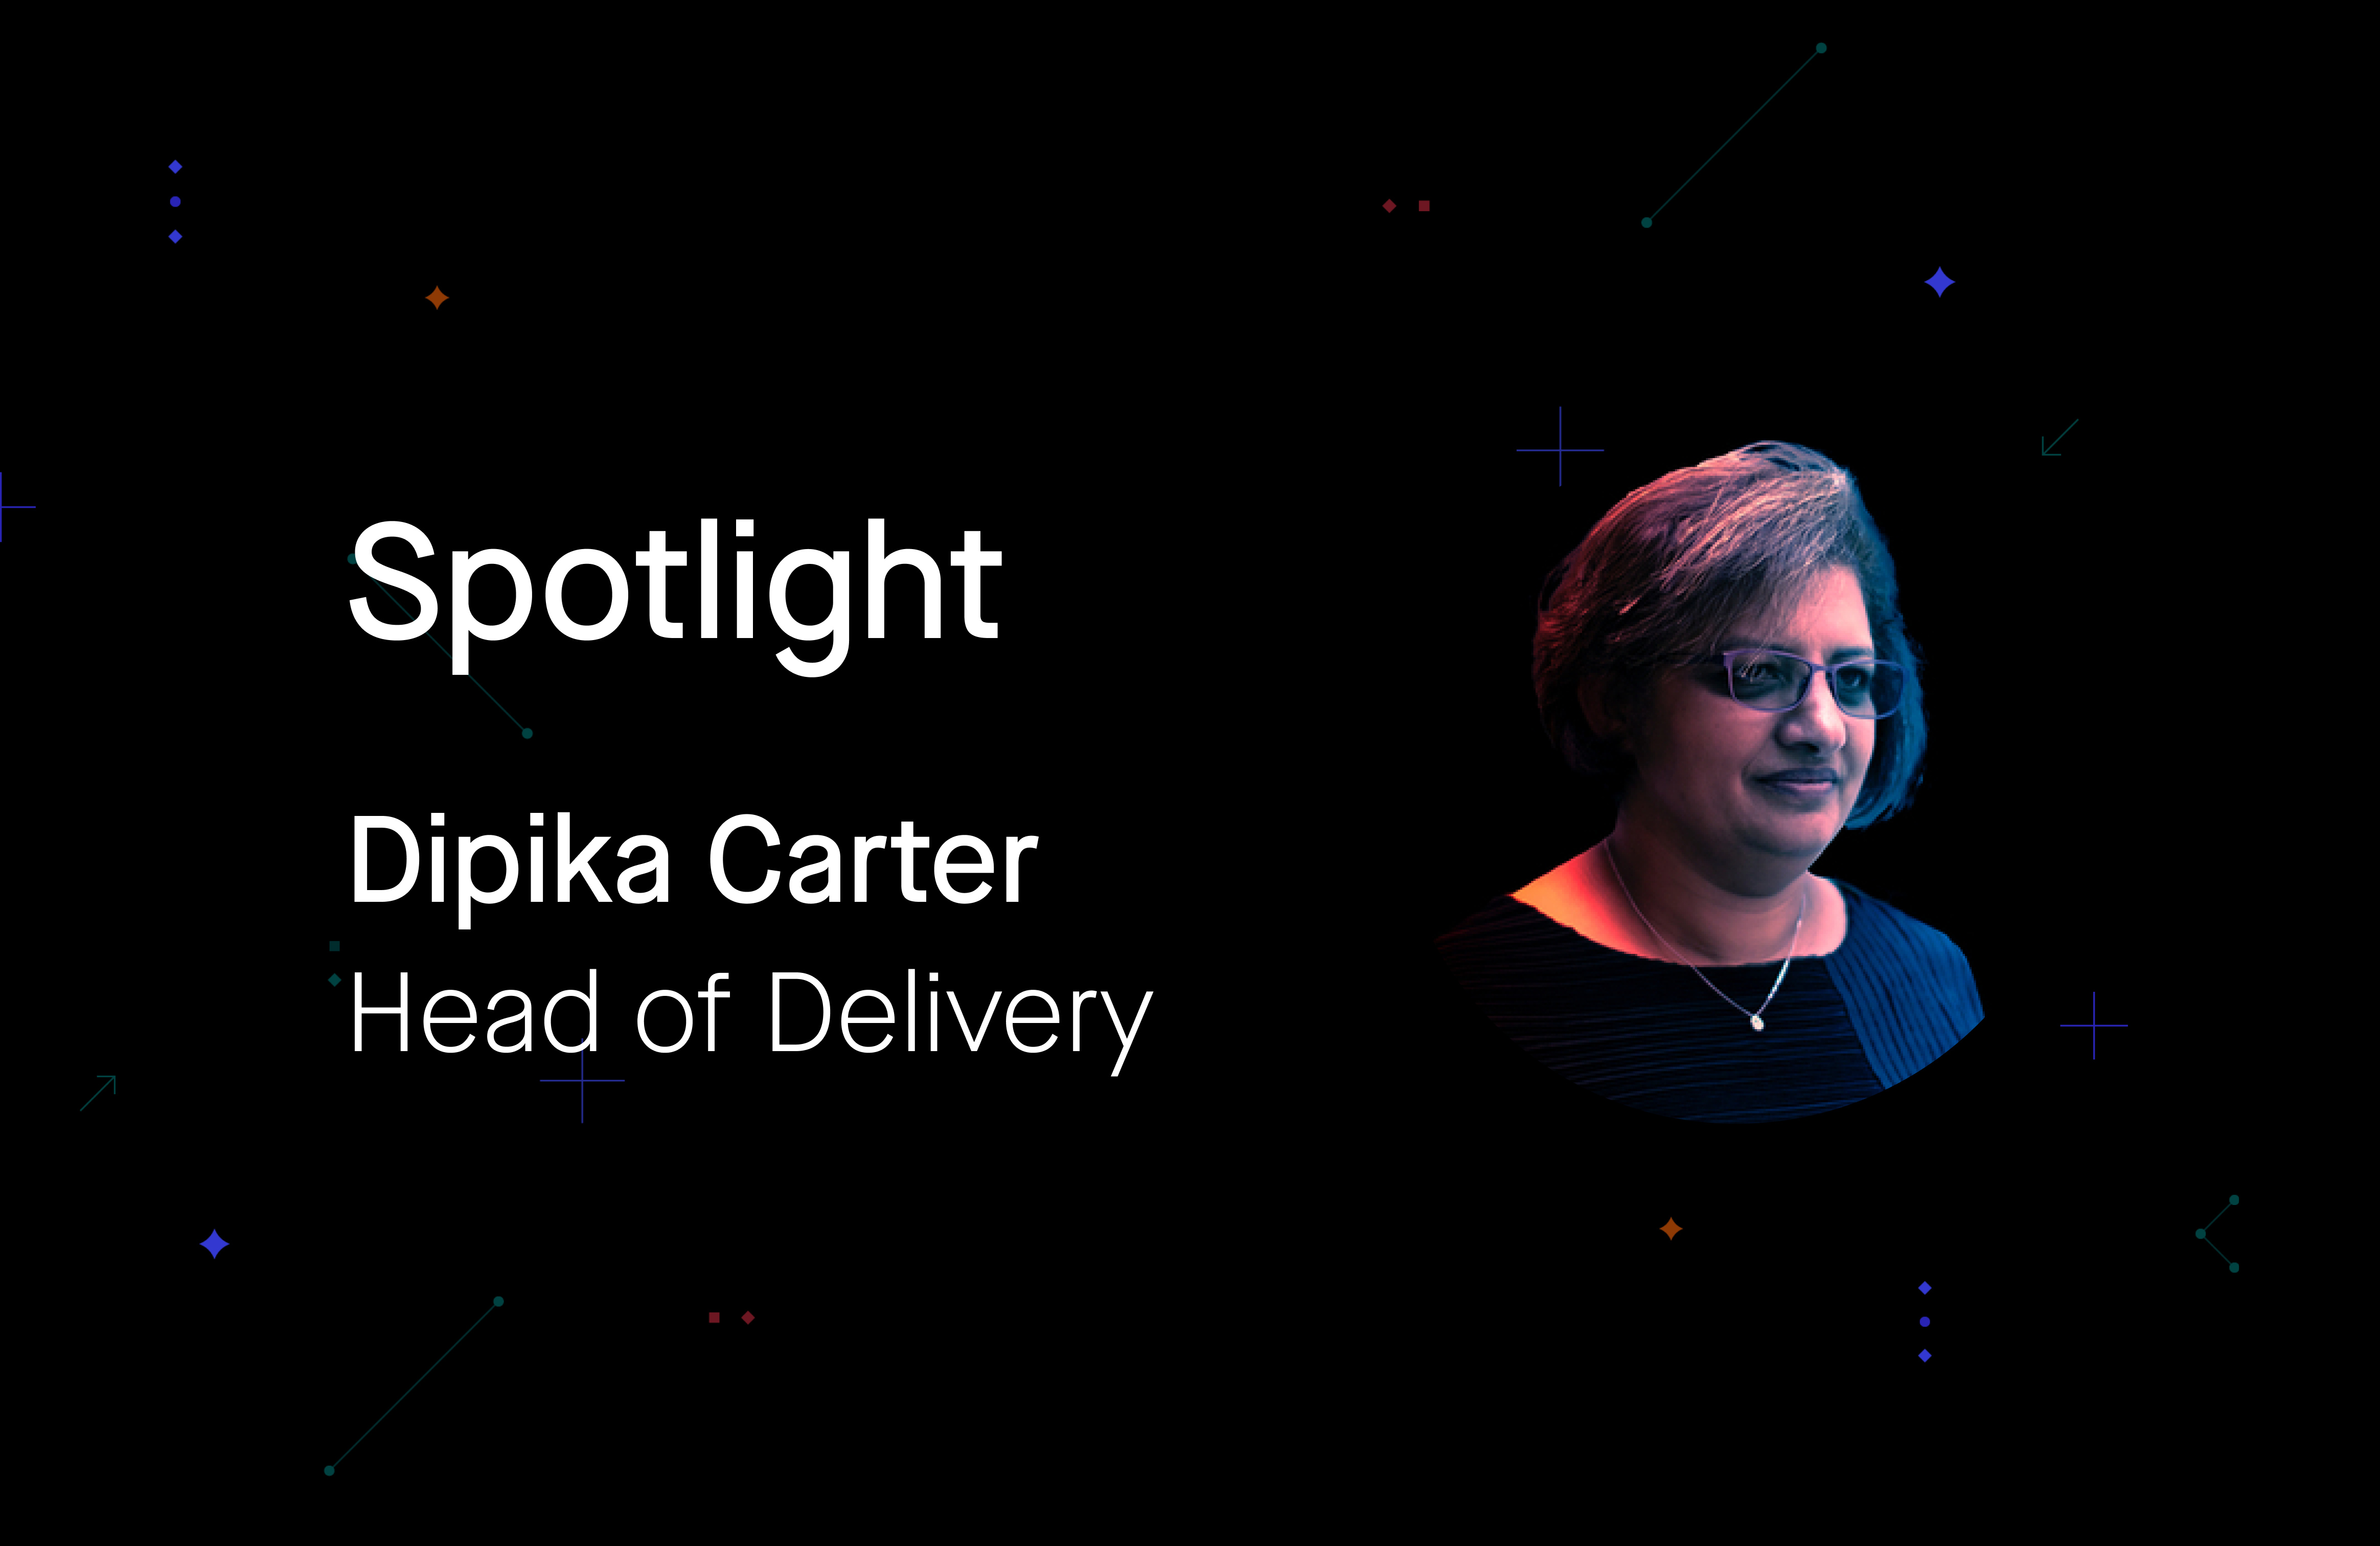 dipika carter - head of delivery